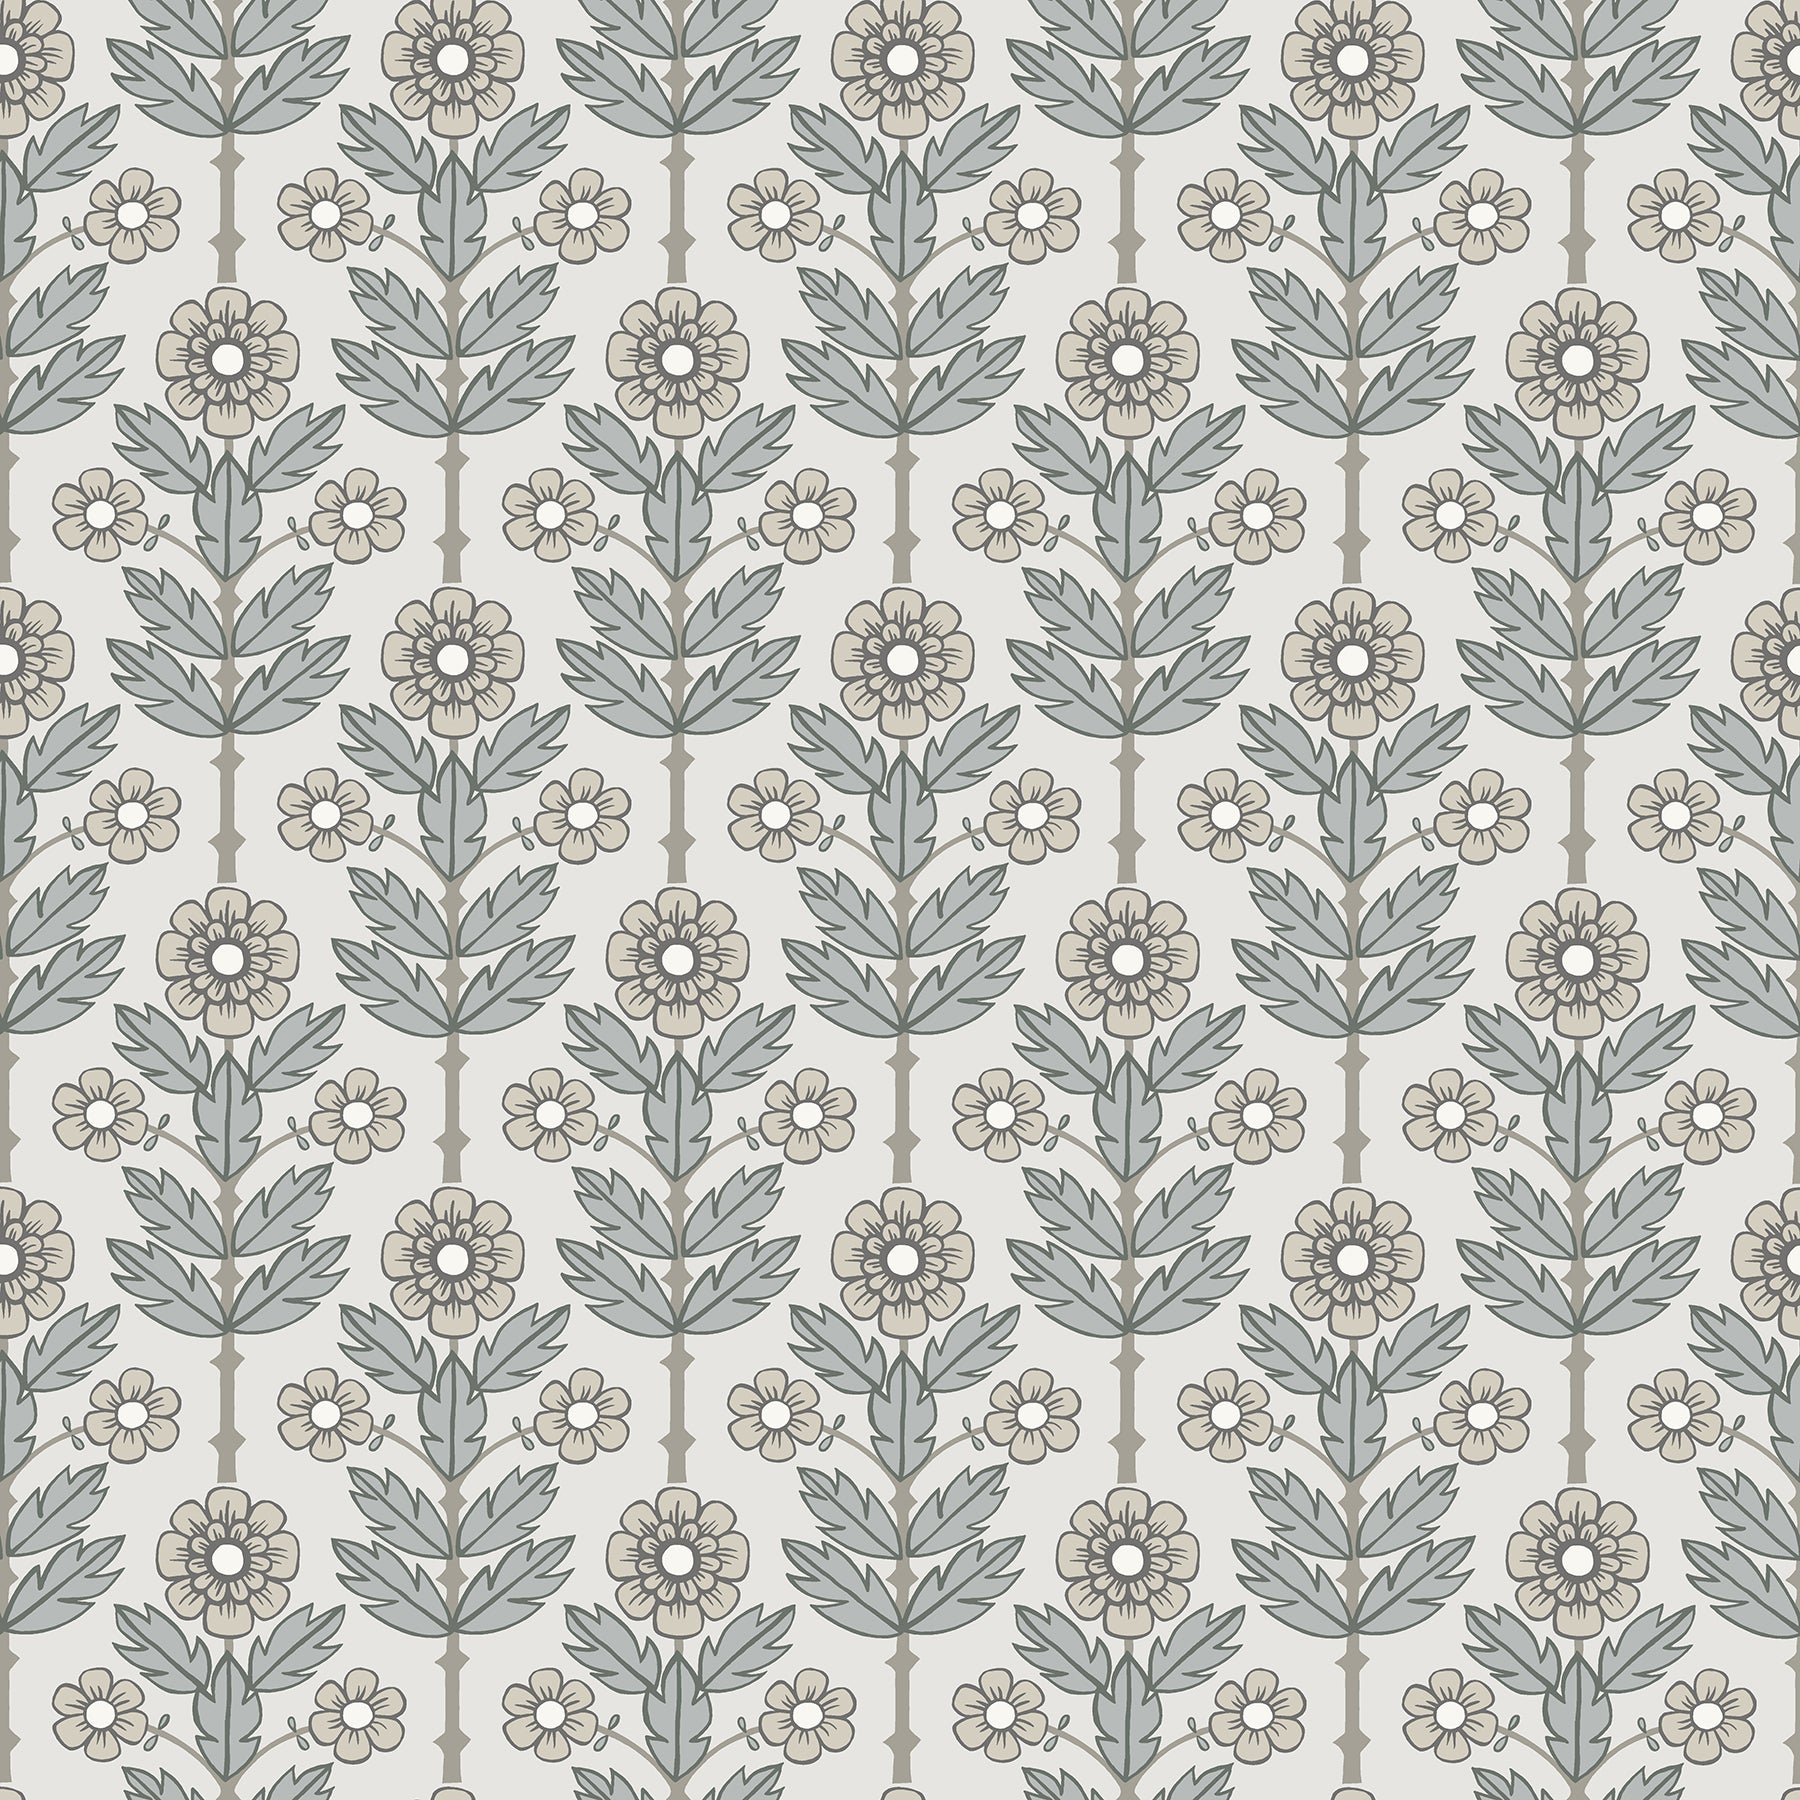 Acquire 2948-28005 Spring Aya White Floral White A-Street Prints Wallpaper